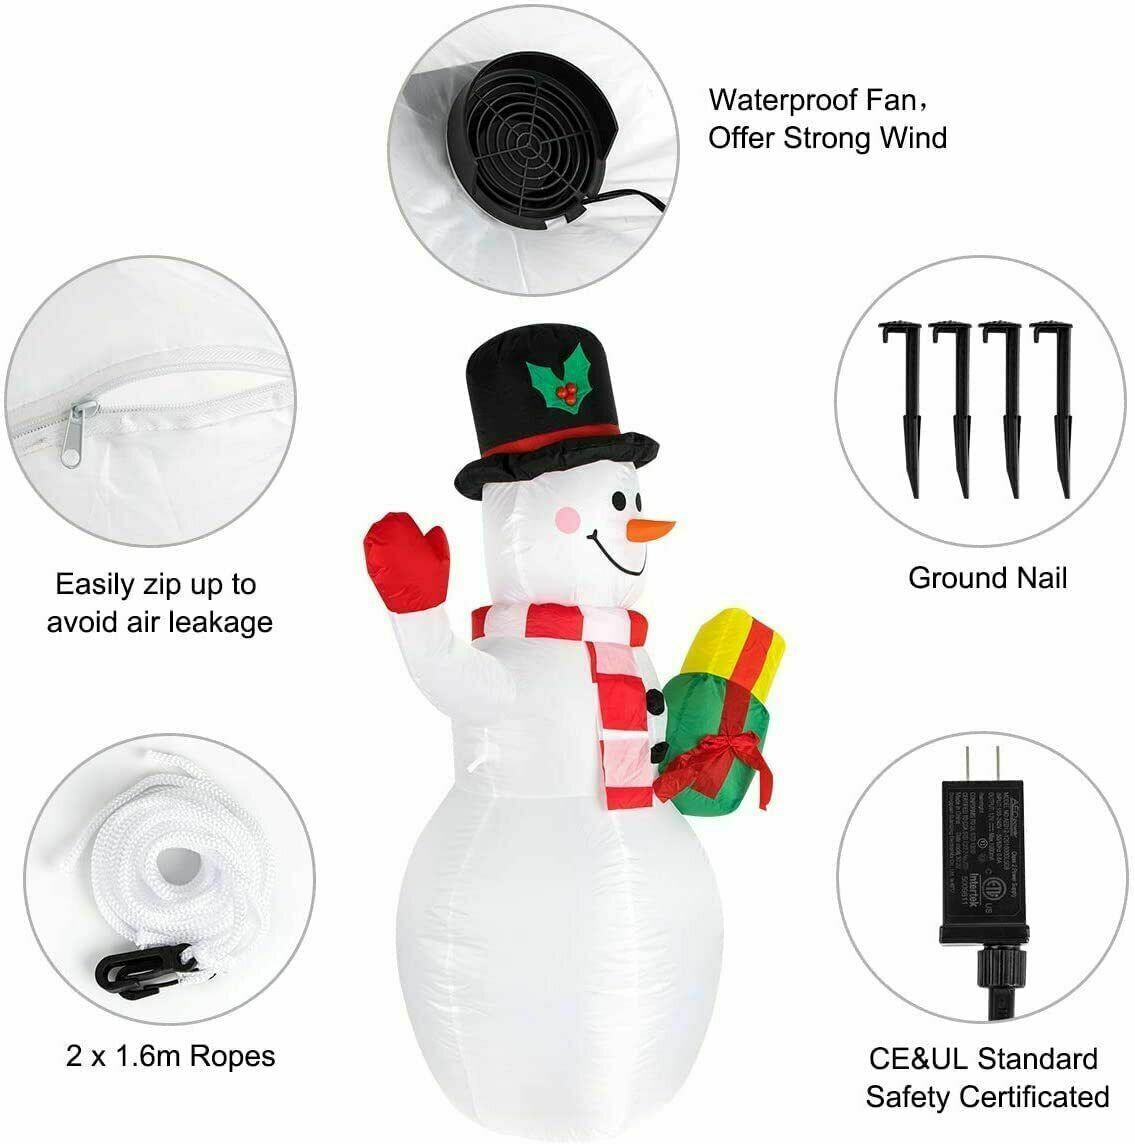 5ft Christmas Inflatables Snowman Outdoor Yard Decor with Rotating LED Lights Christmas Blow Up Decoration Garden - image 5 of 9